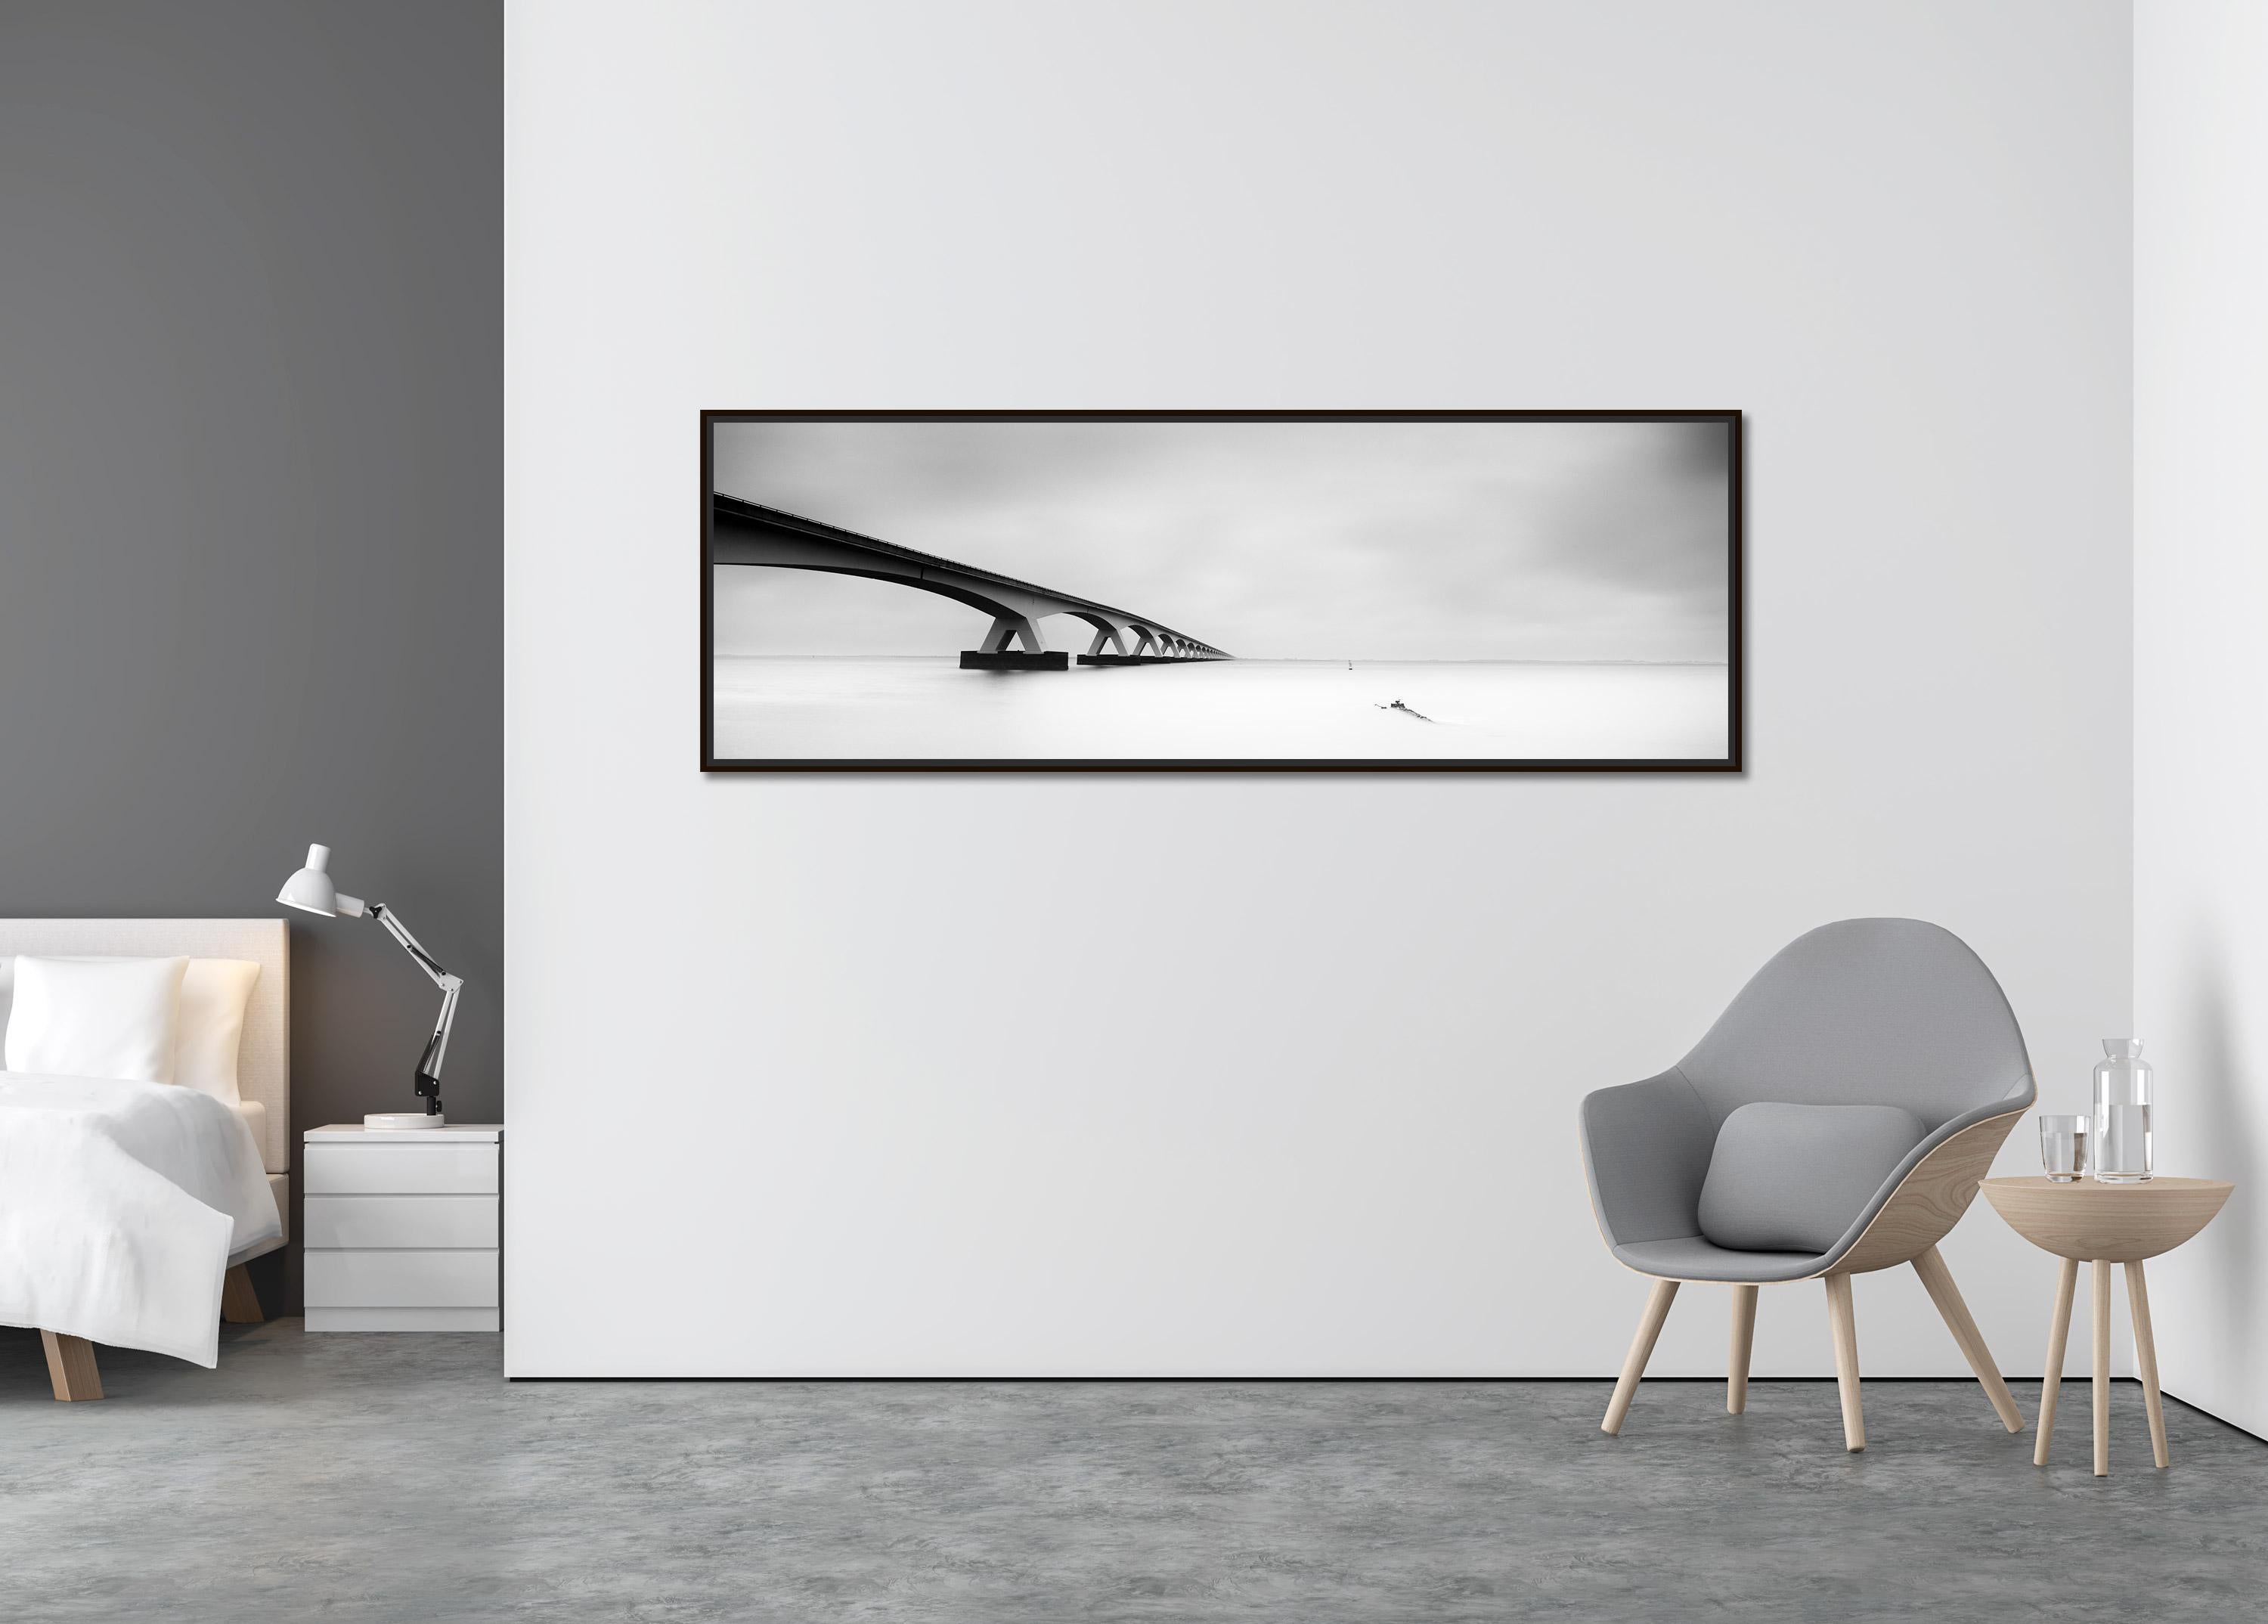 Zeeland Bridge Panorama, Netherlands, black and white waterscape art photography - Contemporary Photograph by Gerald Berghammer